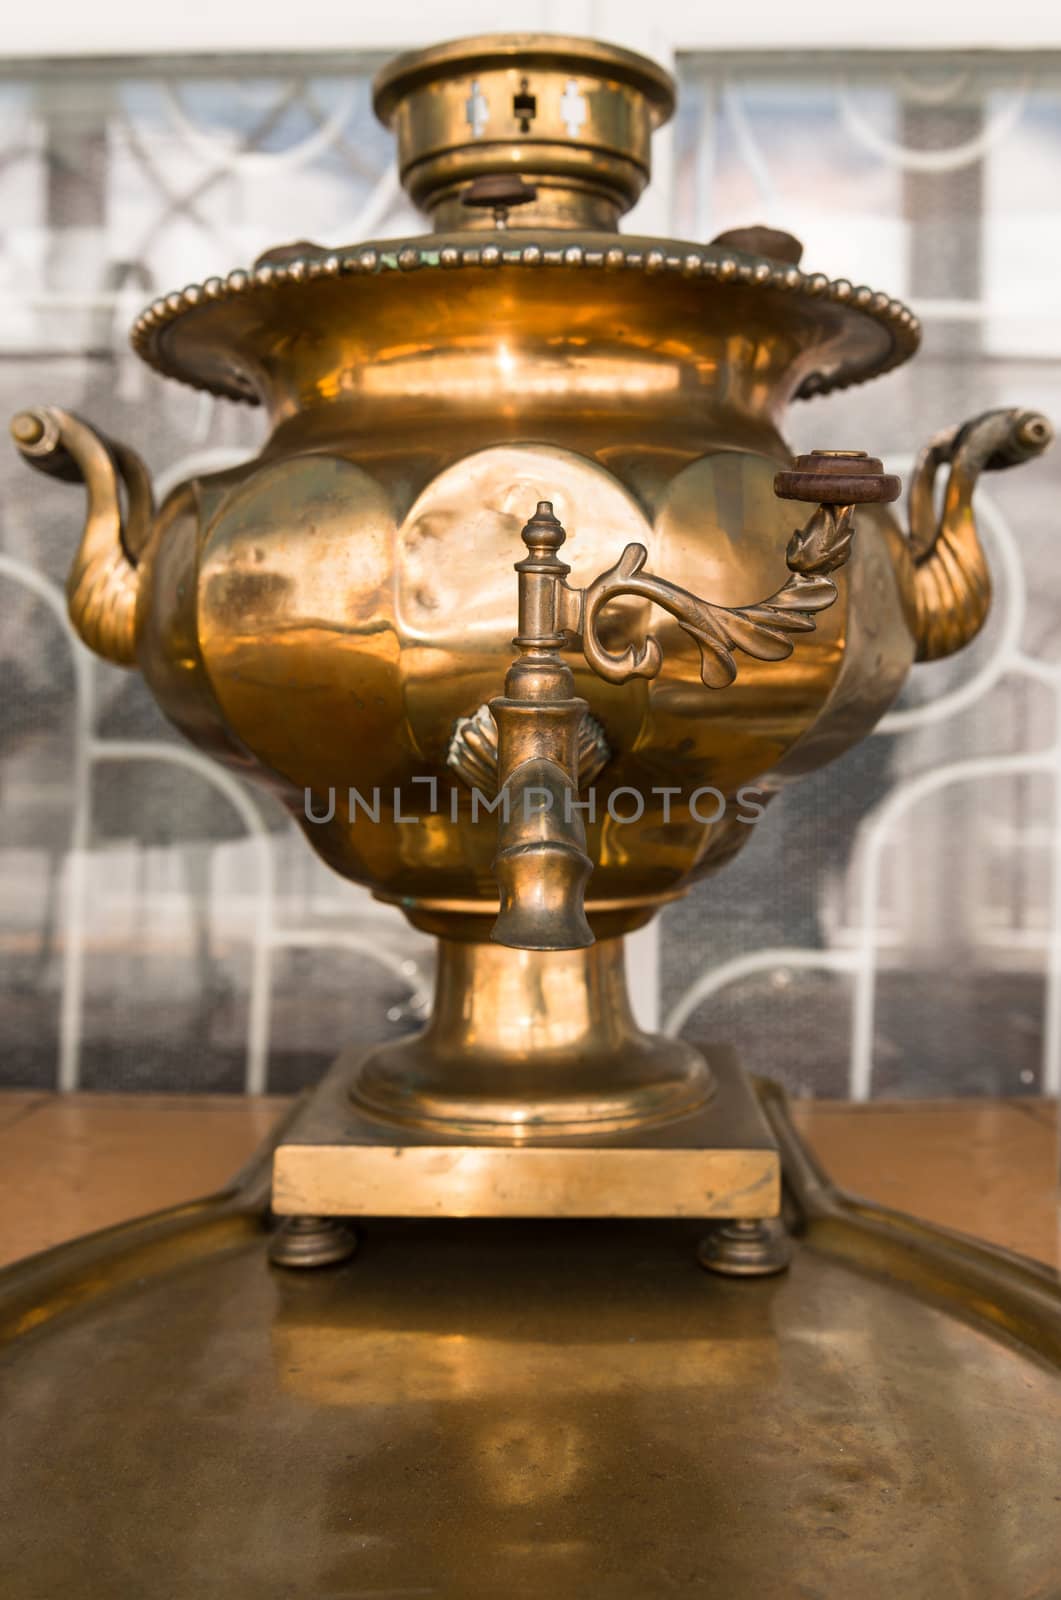 Old russian bronze tea samovar on tray. Selective focus on the tap handle.